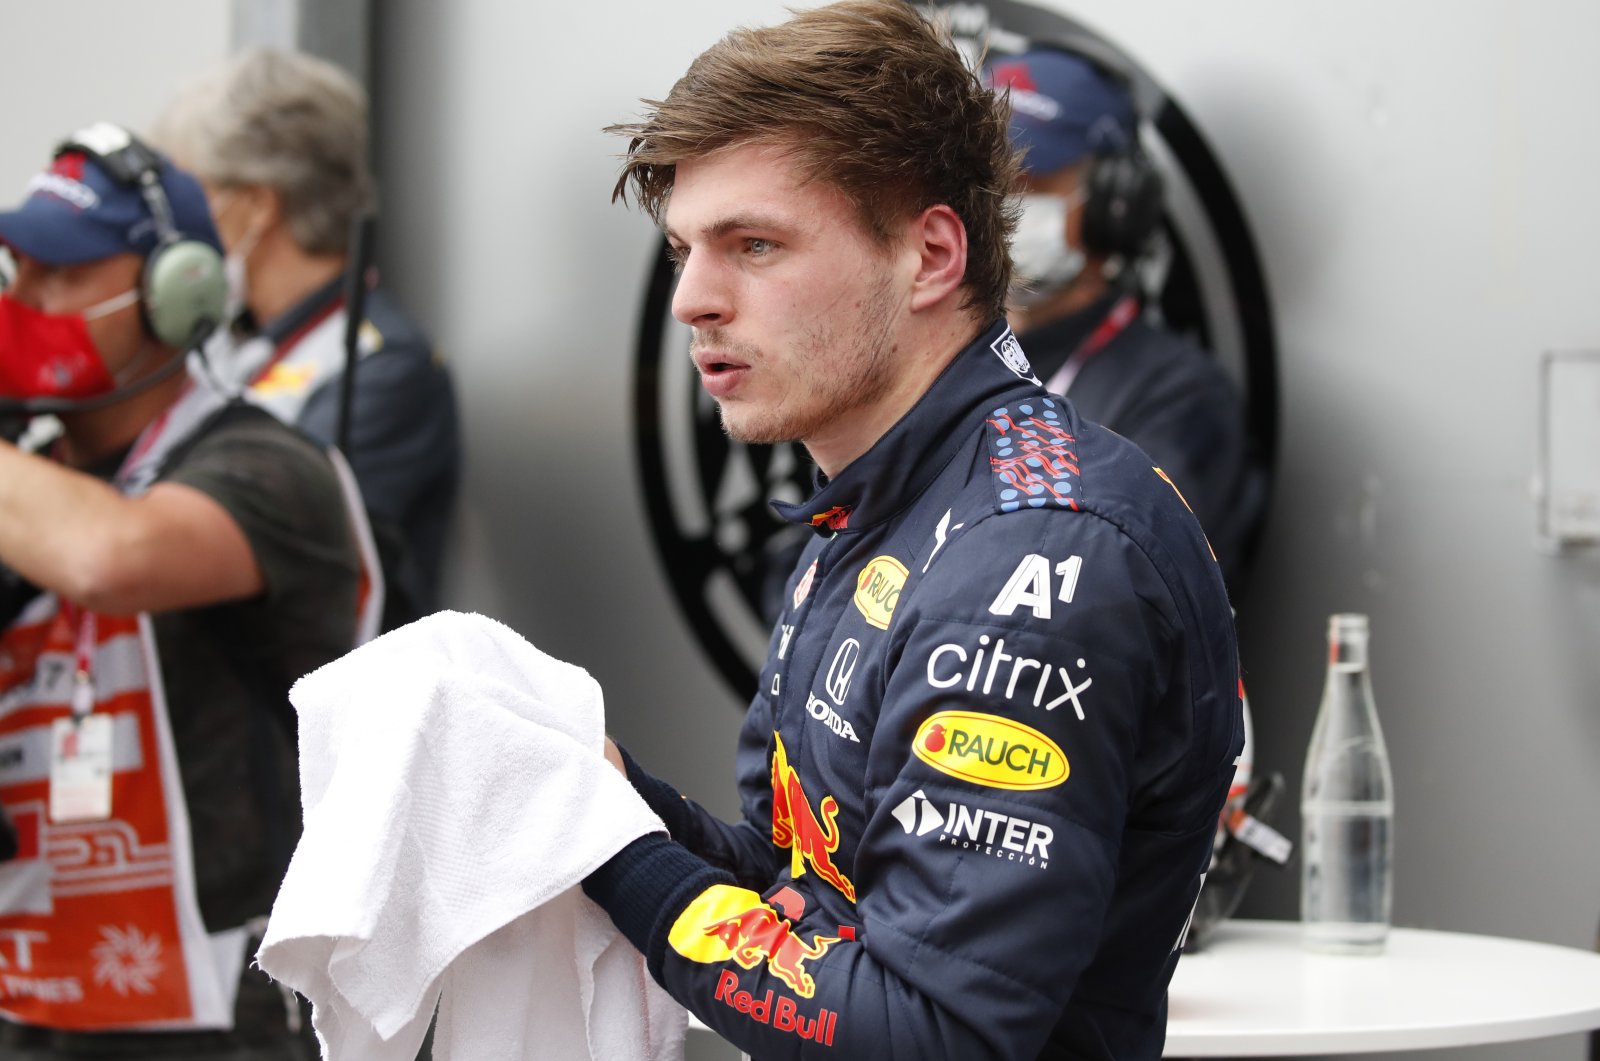 Red Bull Dutch driver Max Verstappen stands in the team garage after the qualifying session in Monaco, May 22, 2021. (AP Photo)